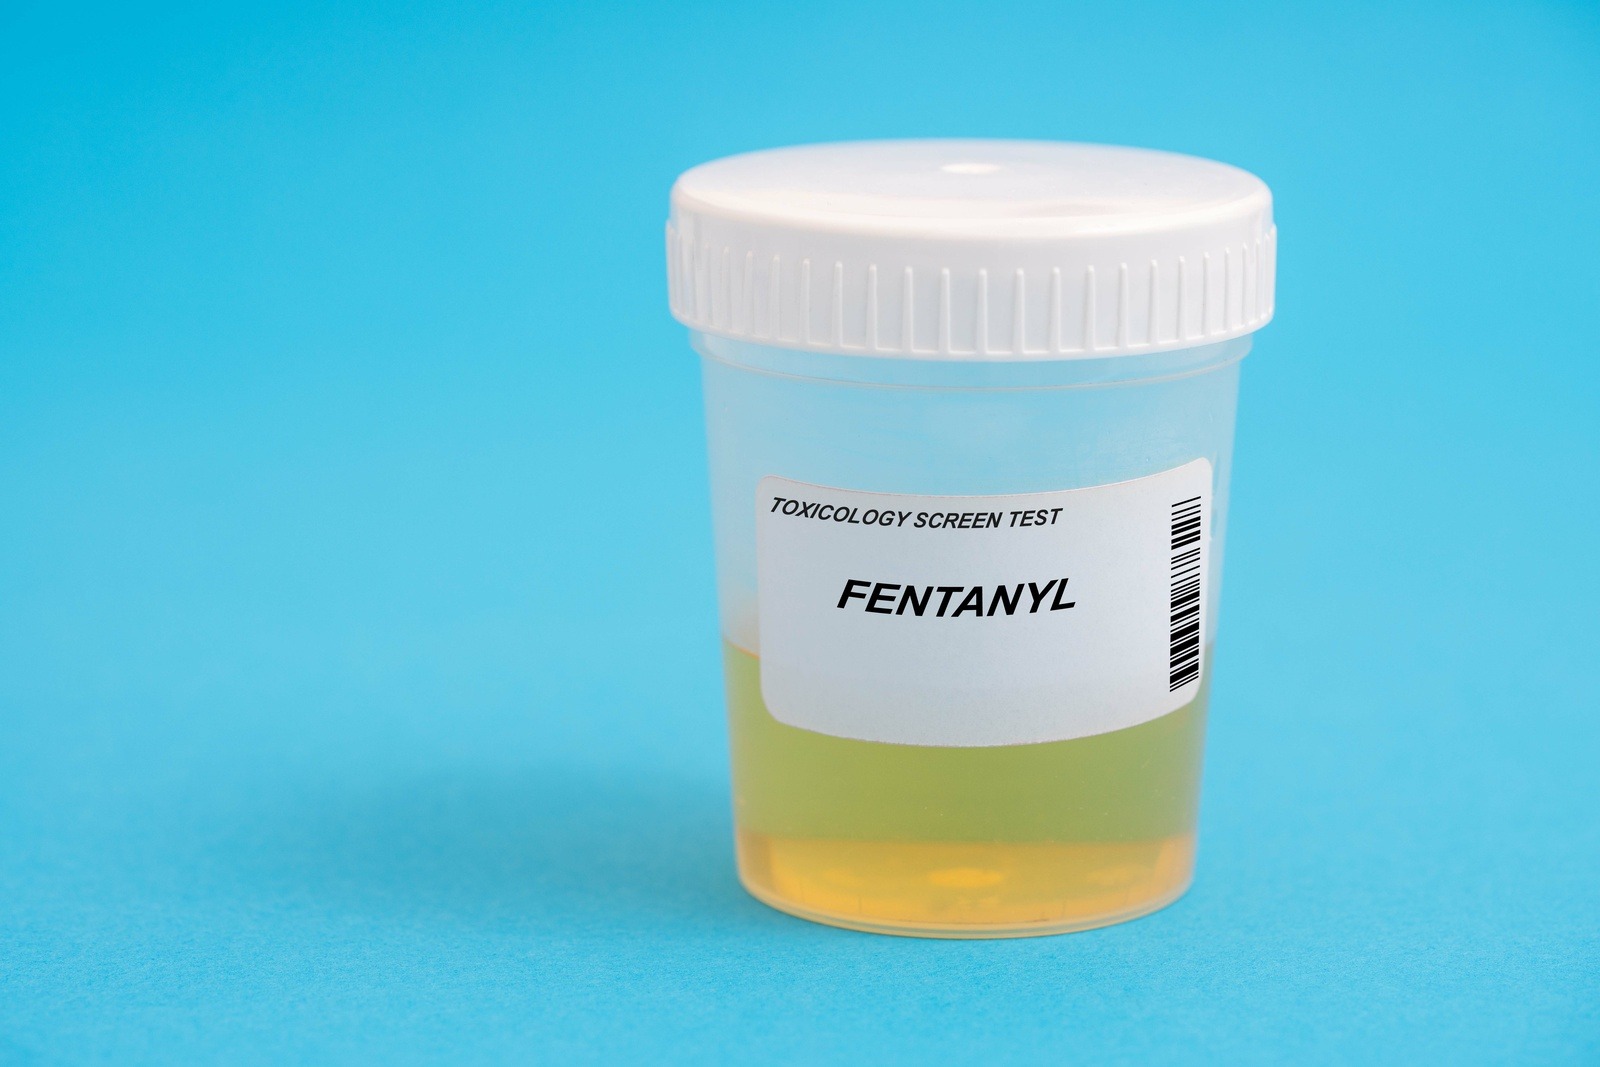 How Long Does Fentanyl Stay In Urine?